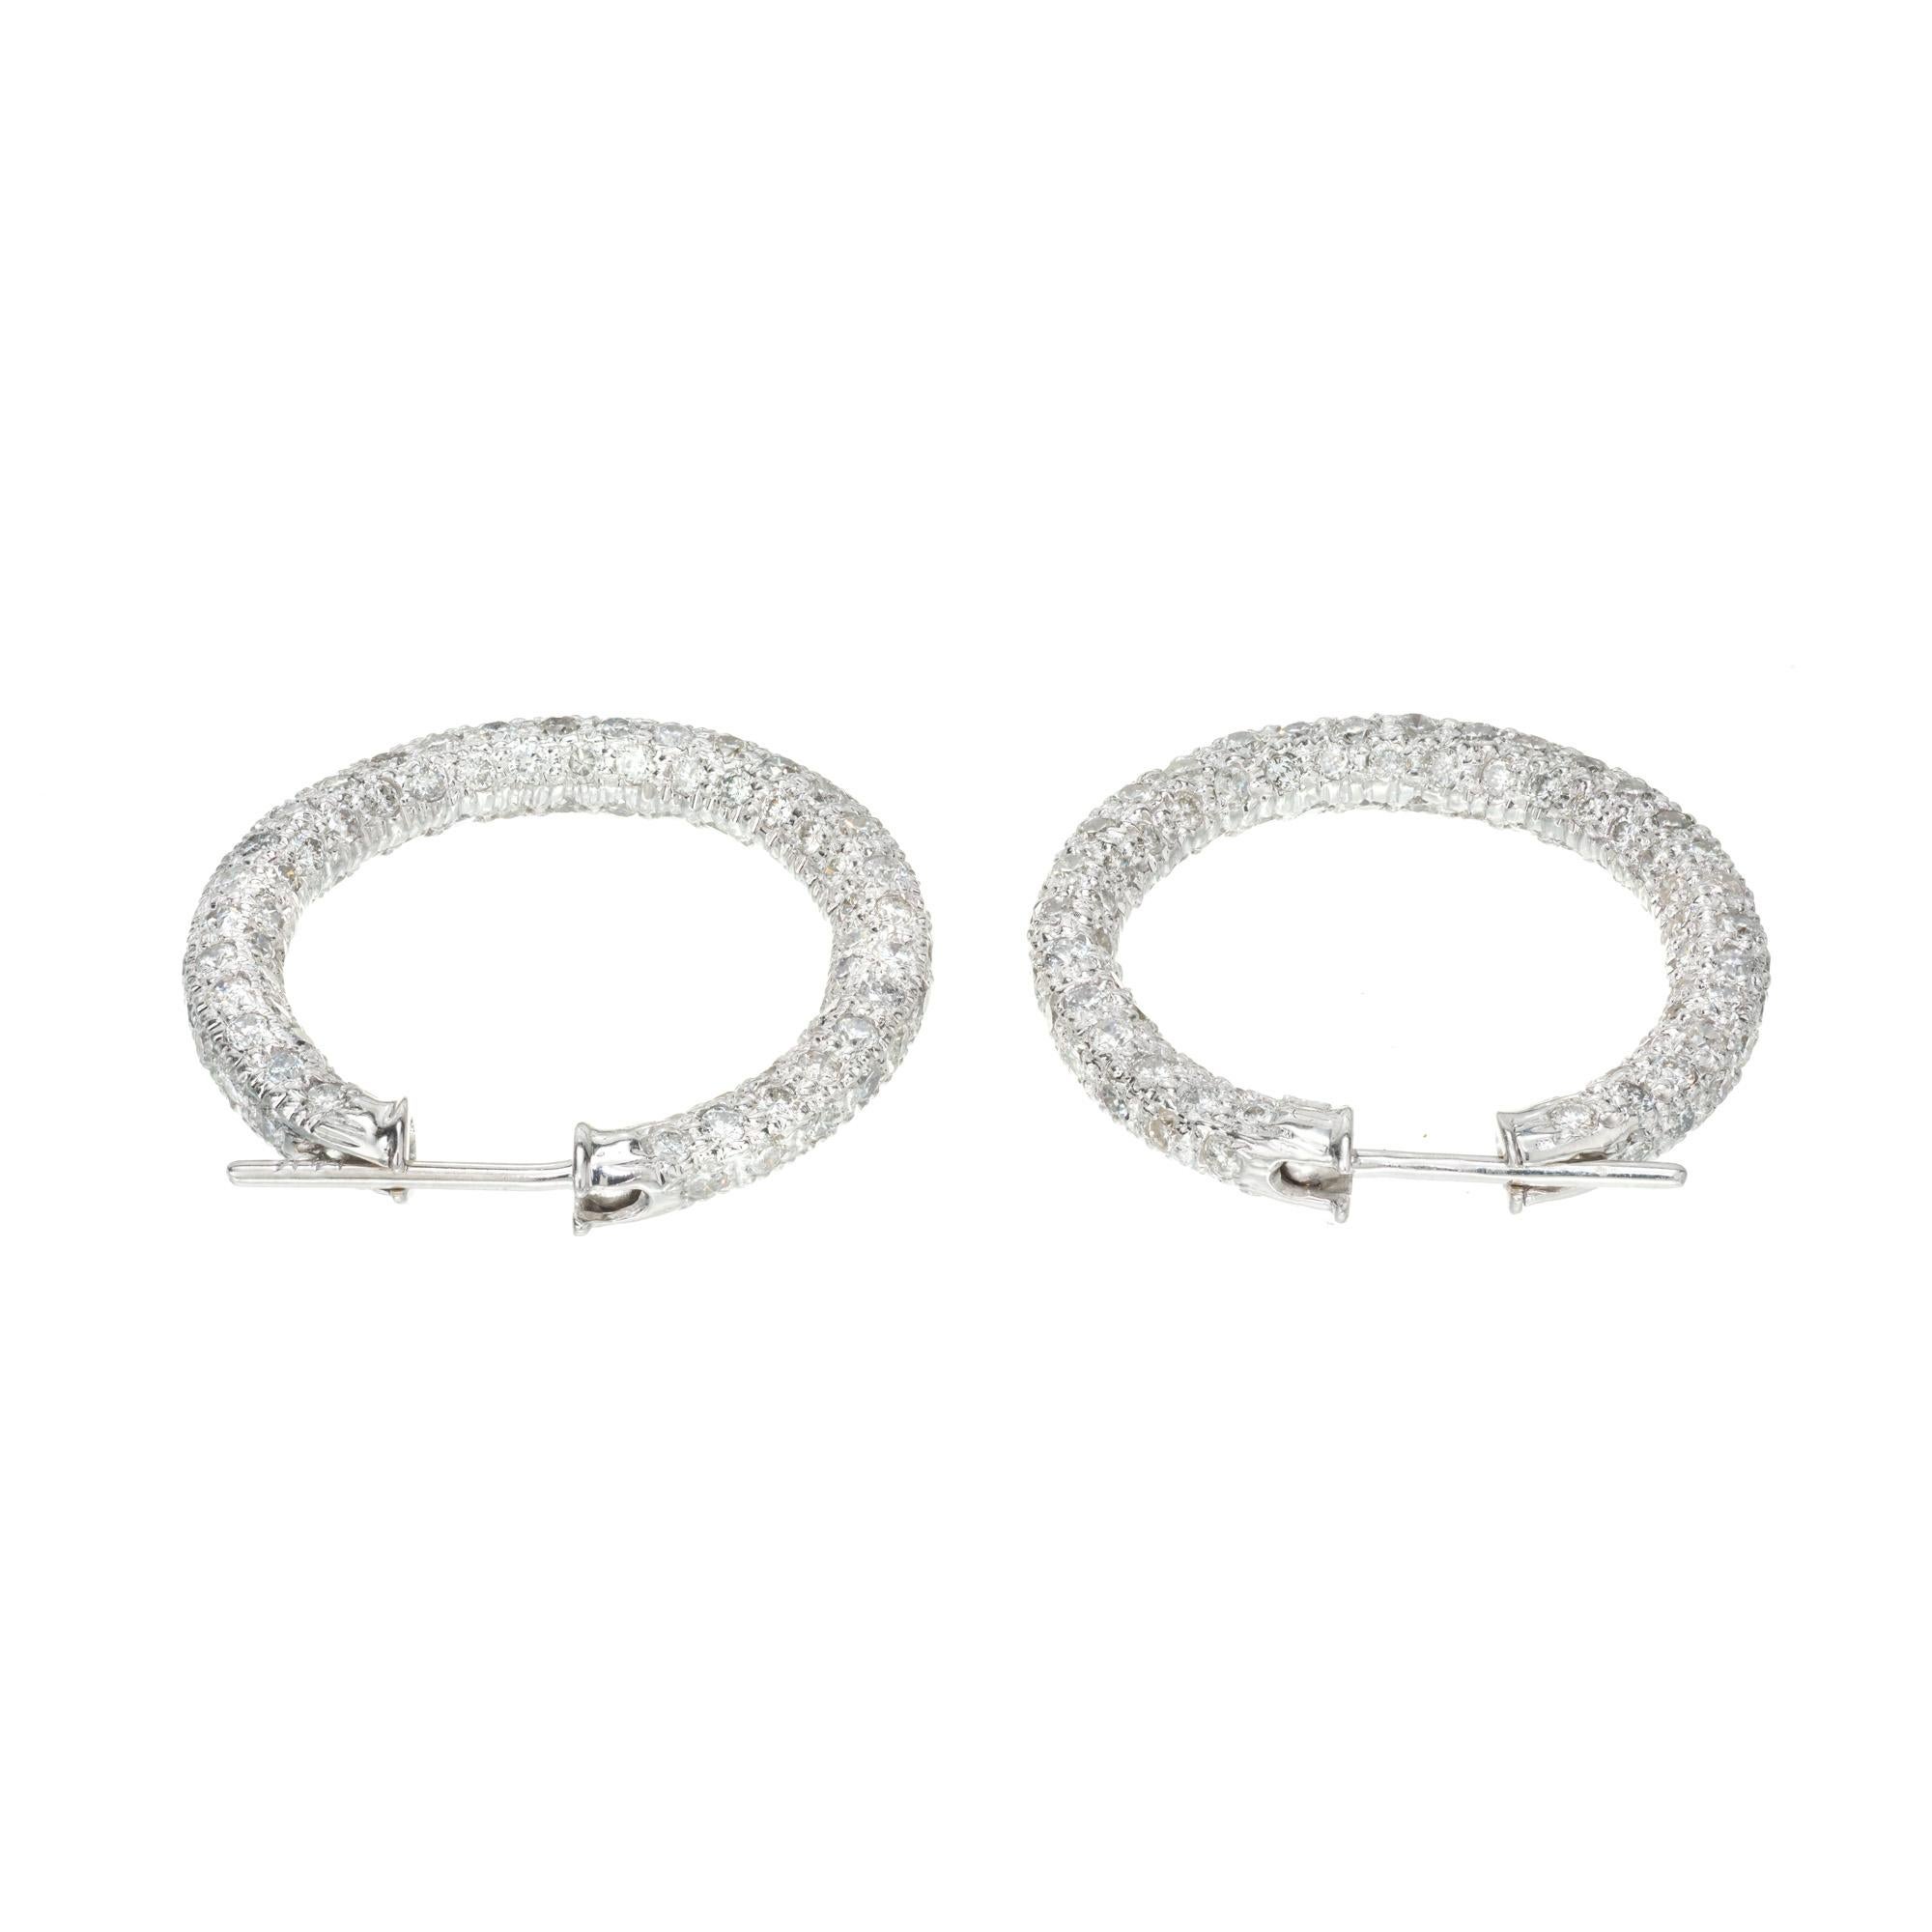 4.20 Carat Round Diamond Pave Gold Hoop Earrings In Good Condition For Sale In Stamford, CT